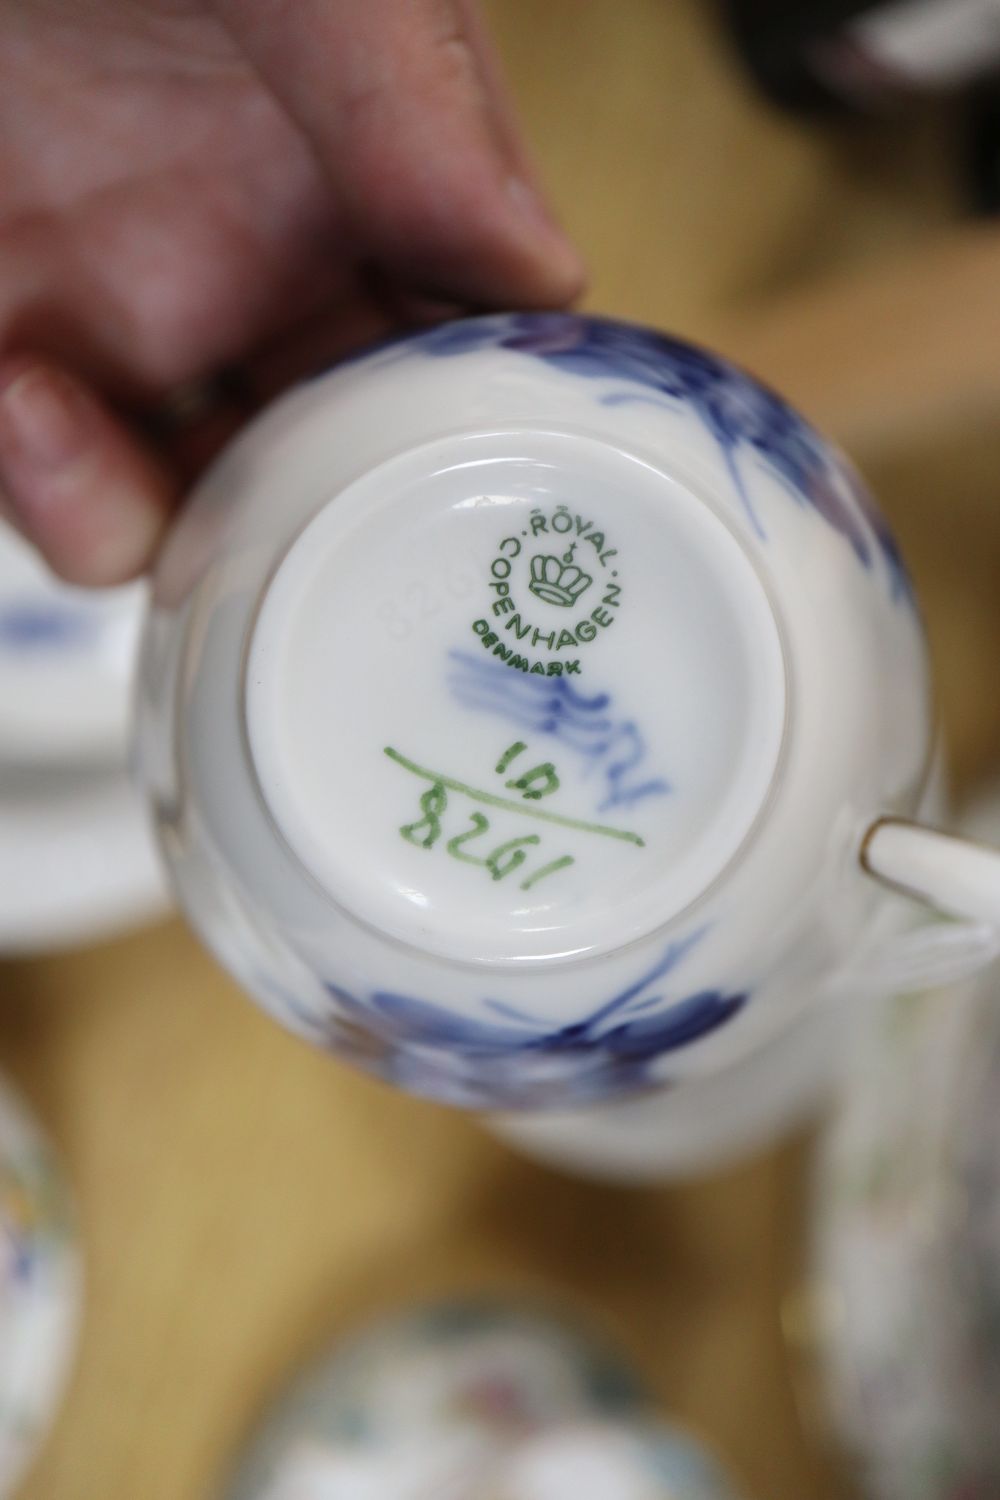 A collection of decorative ceramics, including a Royal Cauldon Blue Lagoon jar and cover,